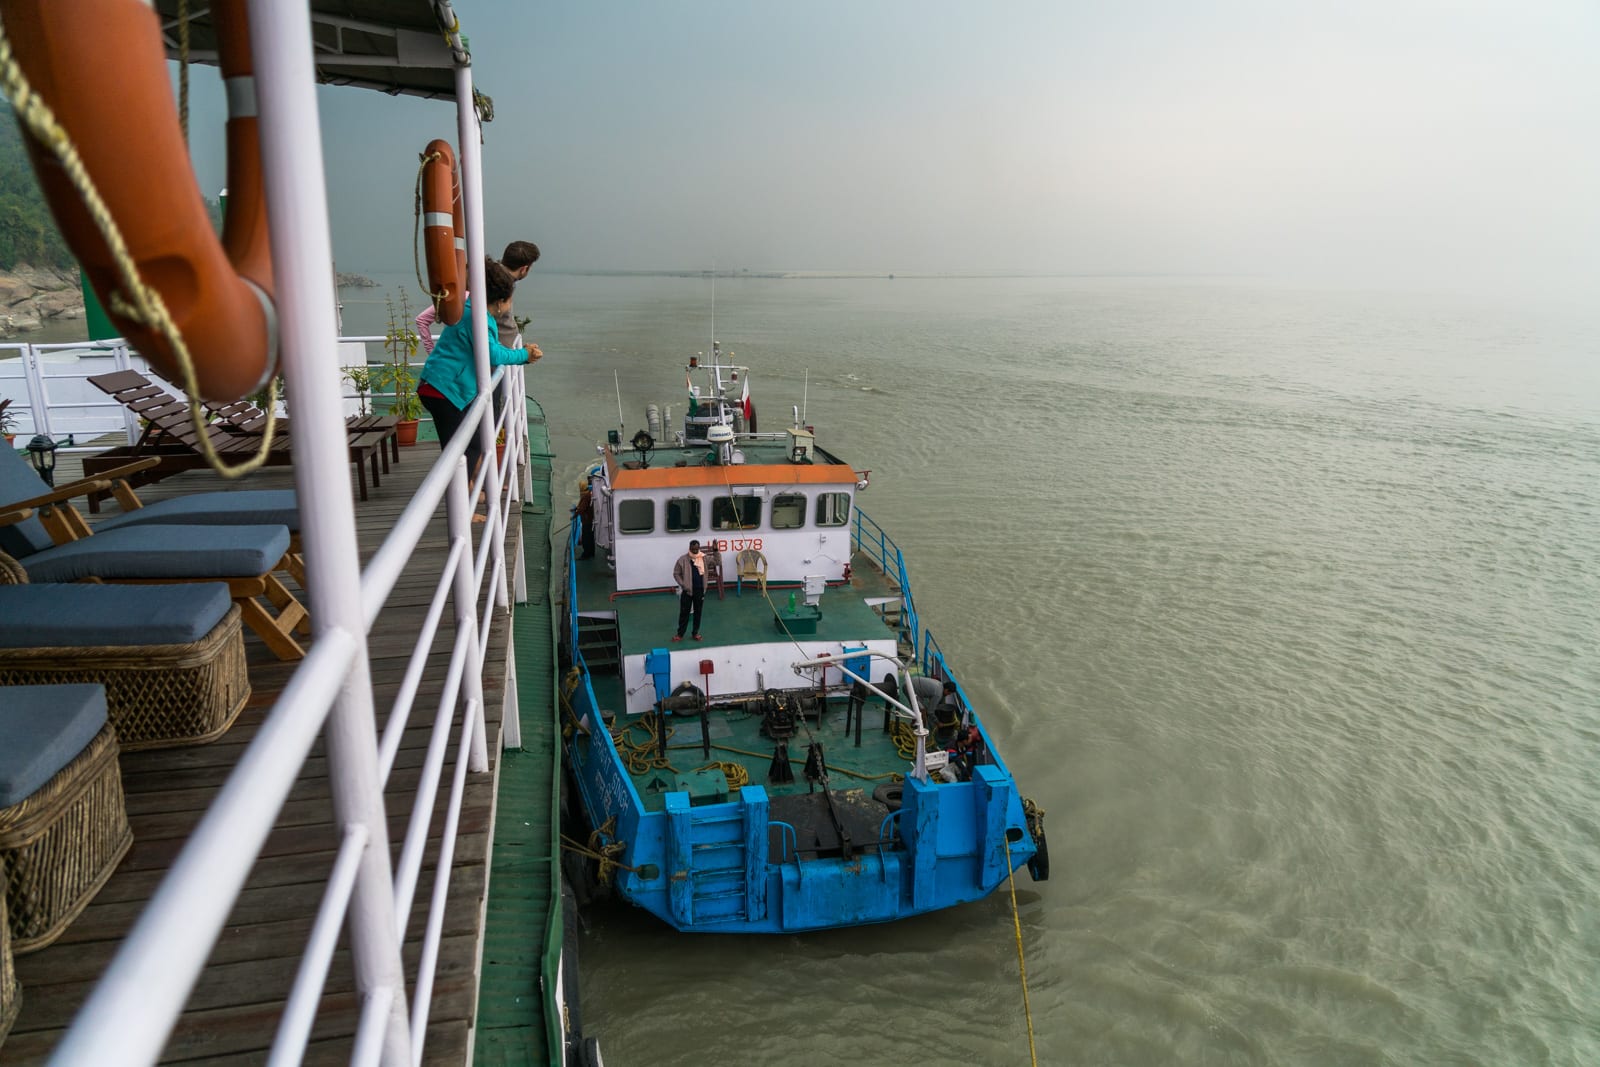 Review of a river cruise on the Brahmaputra with Assam Bengal Navigation - Tugboat pushing the cruise boat - Lost With Purpose travel blog